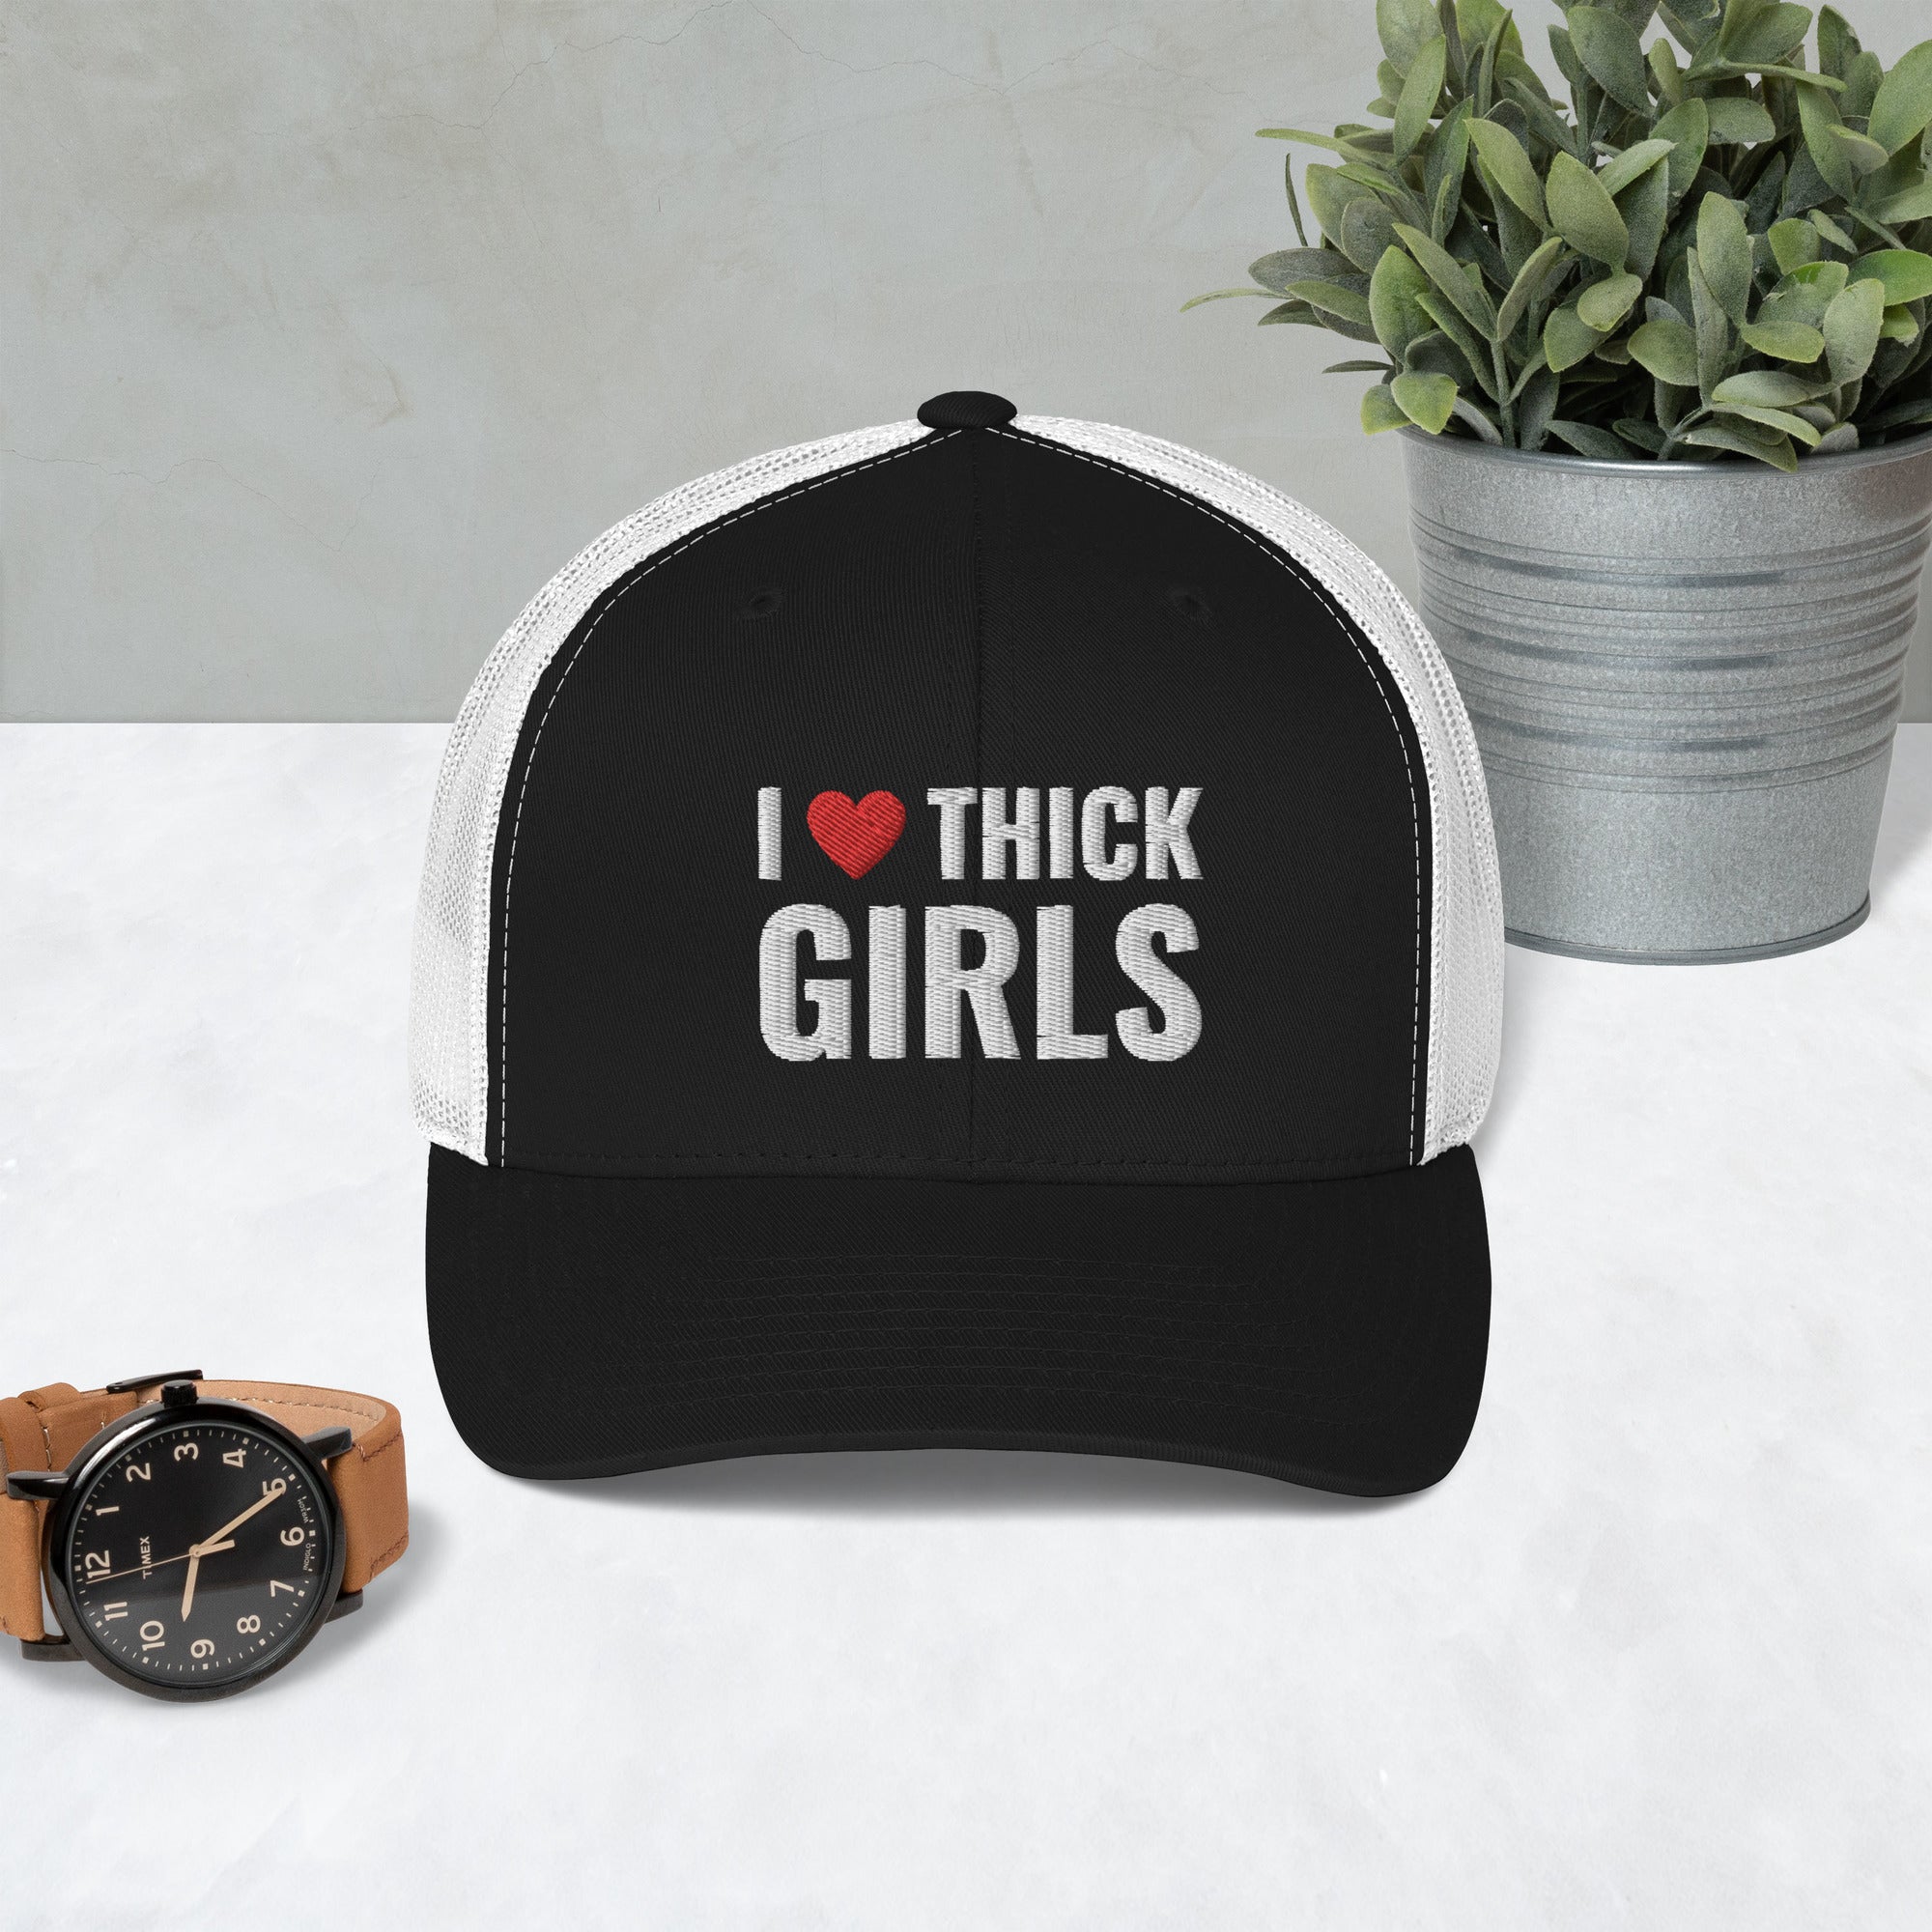 I love thick girls embroidered hat, Funny hot girls hat, hot moms baseball cap, Funny dad hat, Trucker Cap, Thick girl hat - Madeinsea©